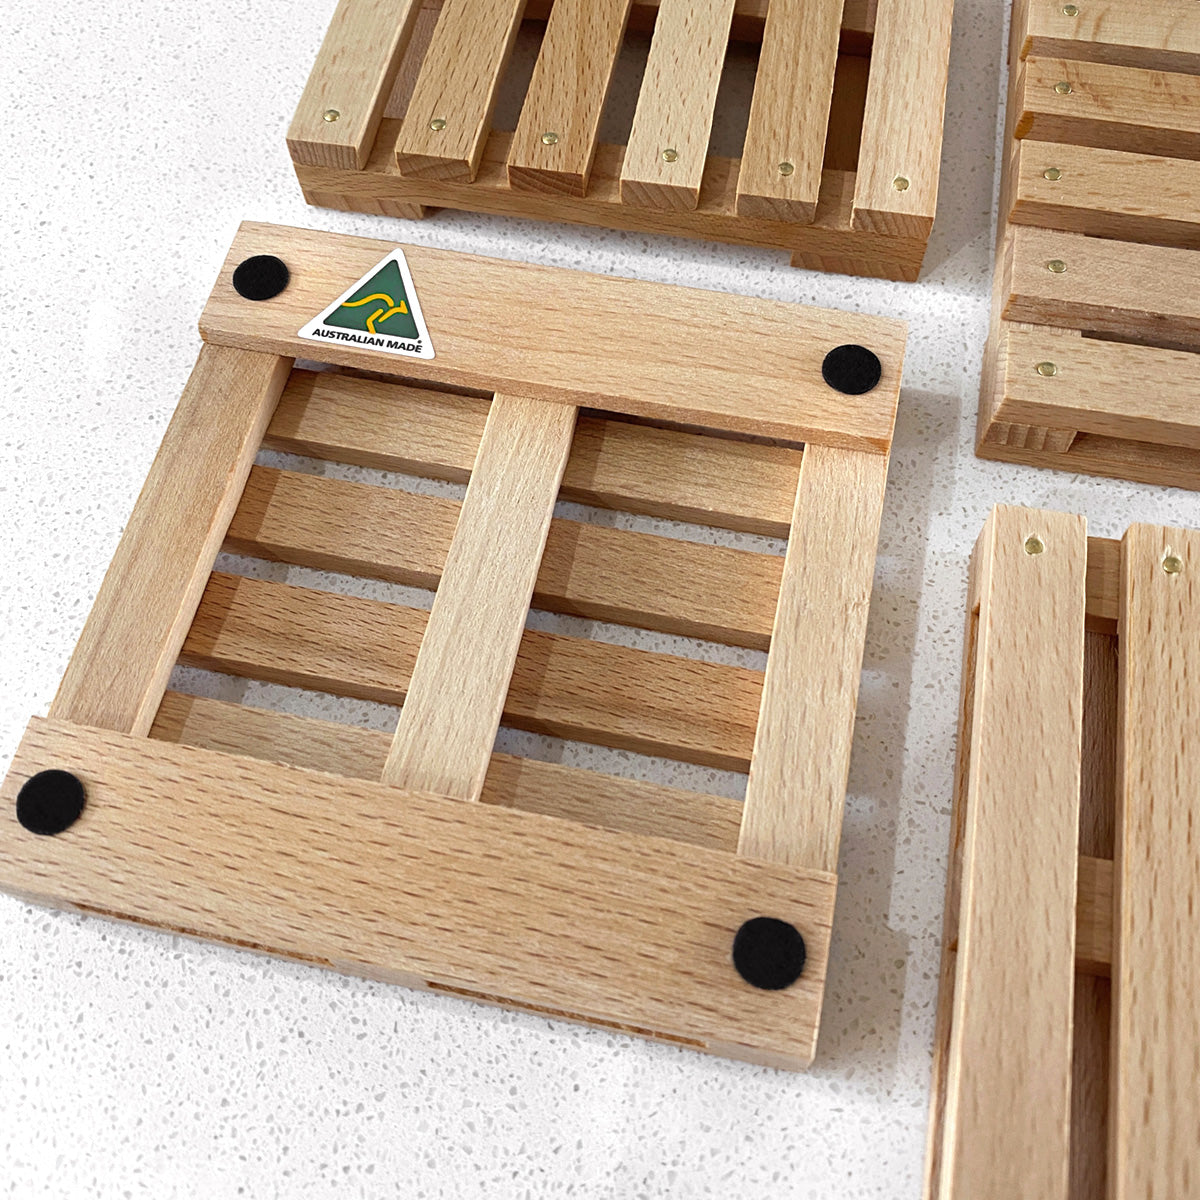 Mini Pallet Wooden Coasters. Set of 4. Close up view, showing rubber bumpers on the back.